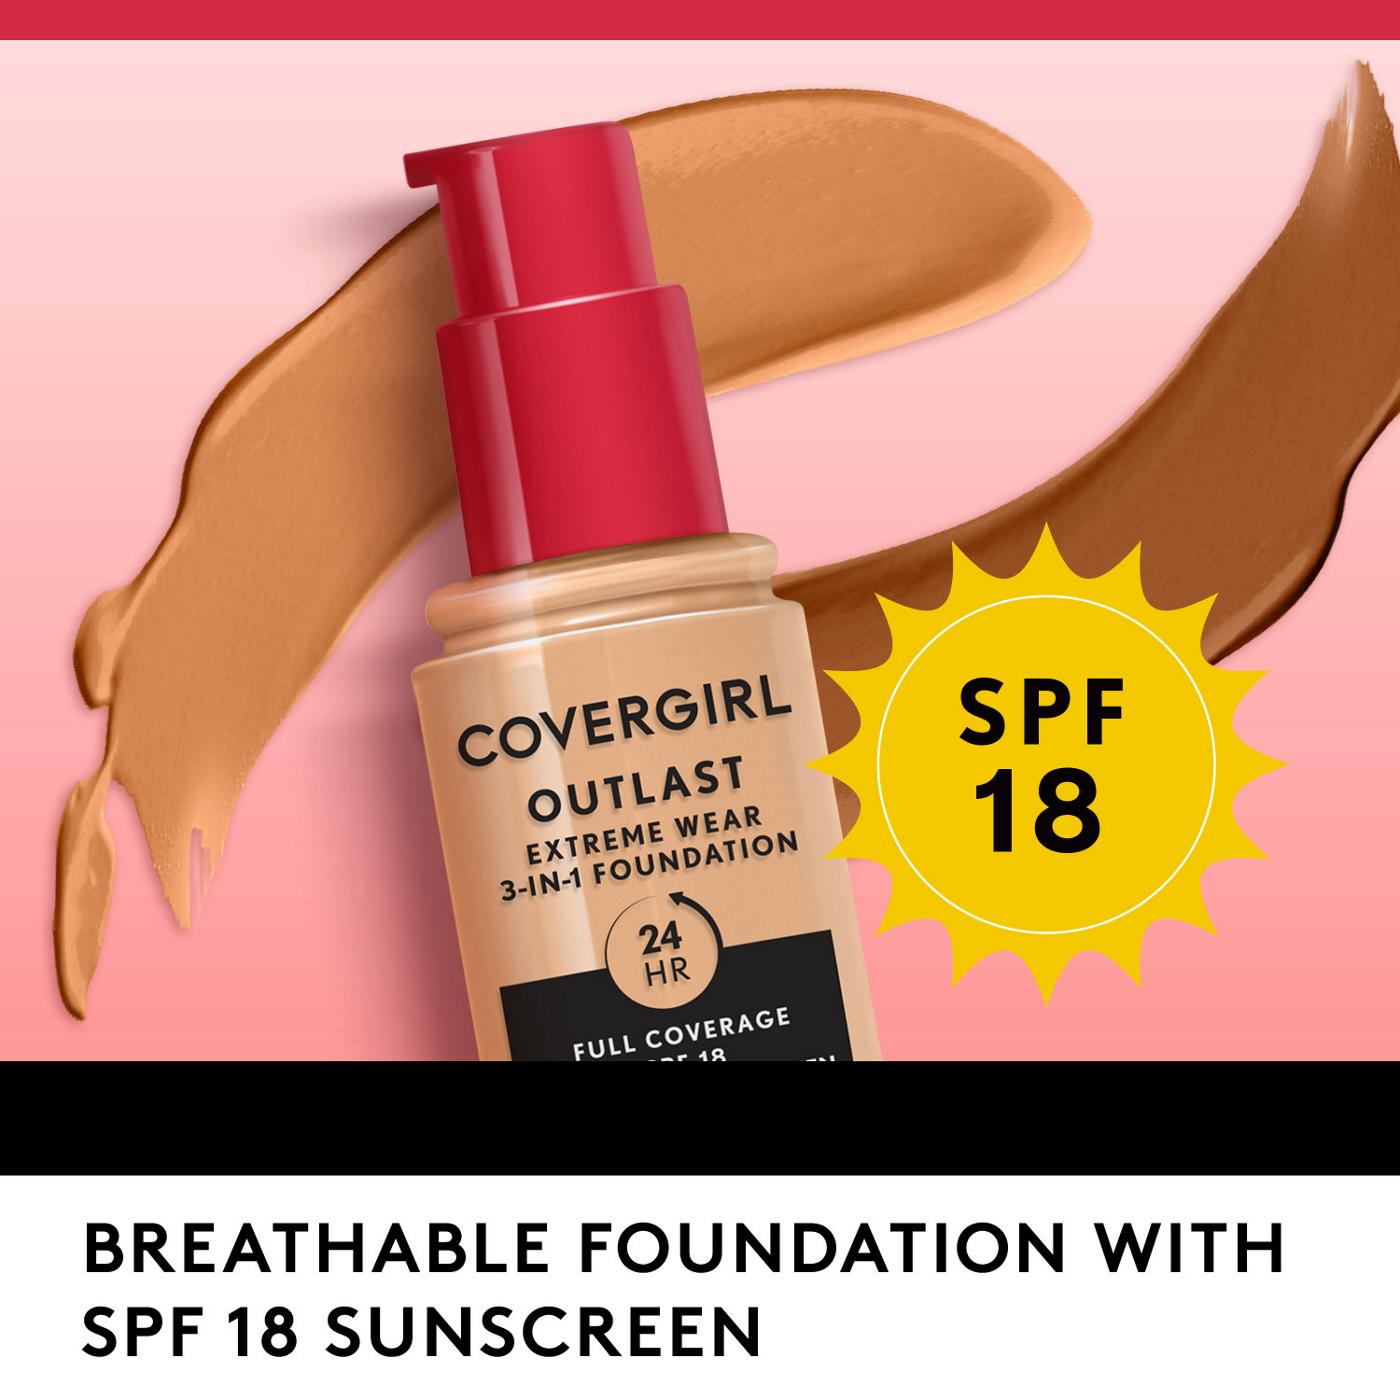 Covergirl Outlast Extreme Wear Liquid Foundation 800 Fair Ivory; image 2 of 11